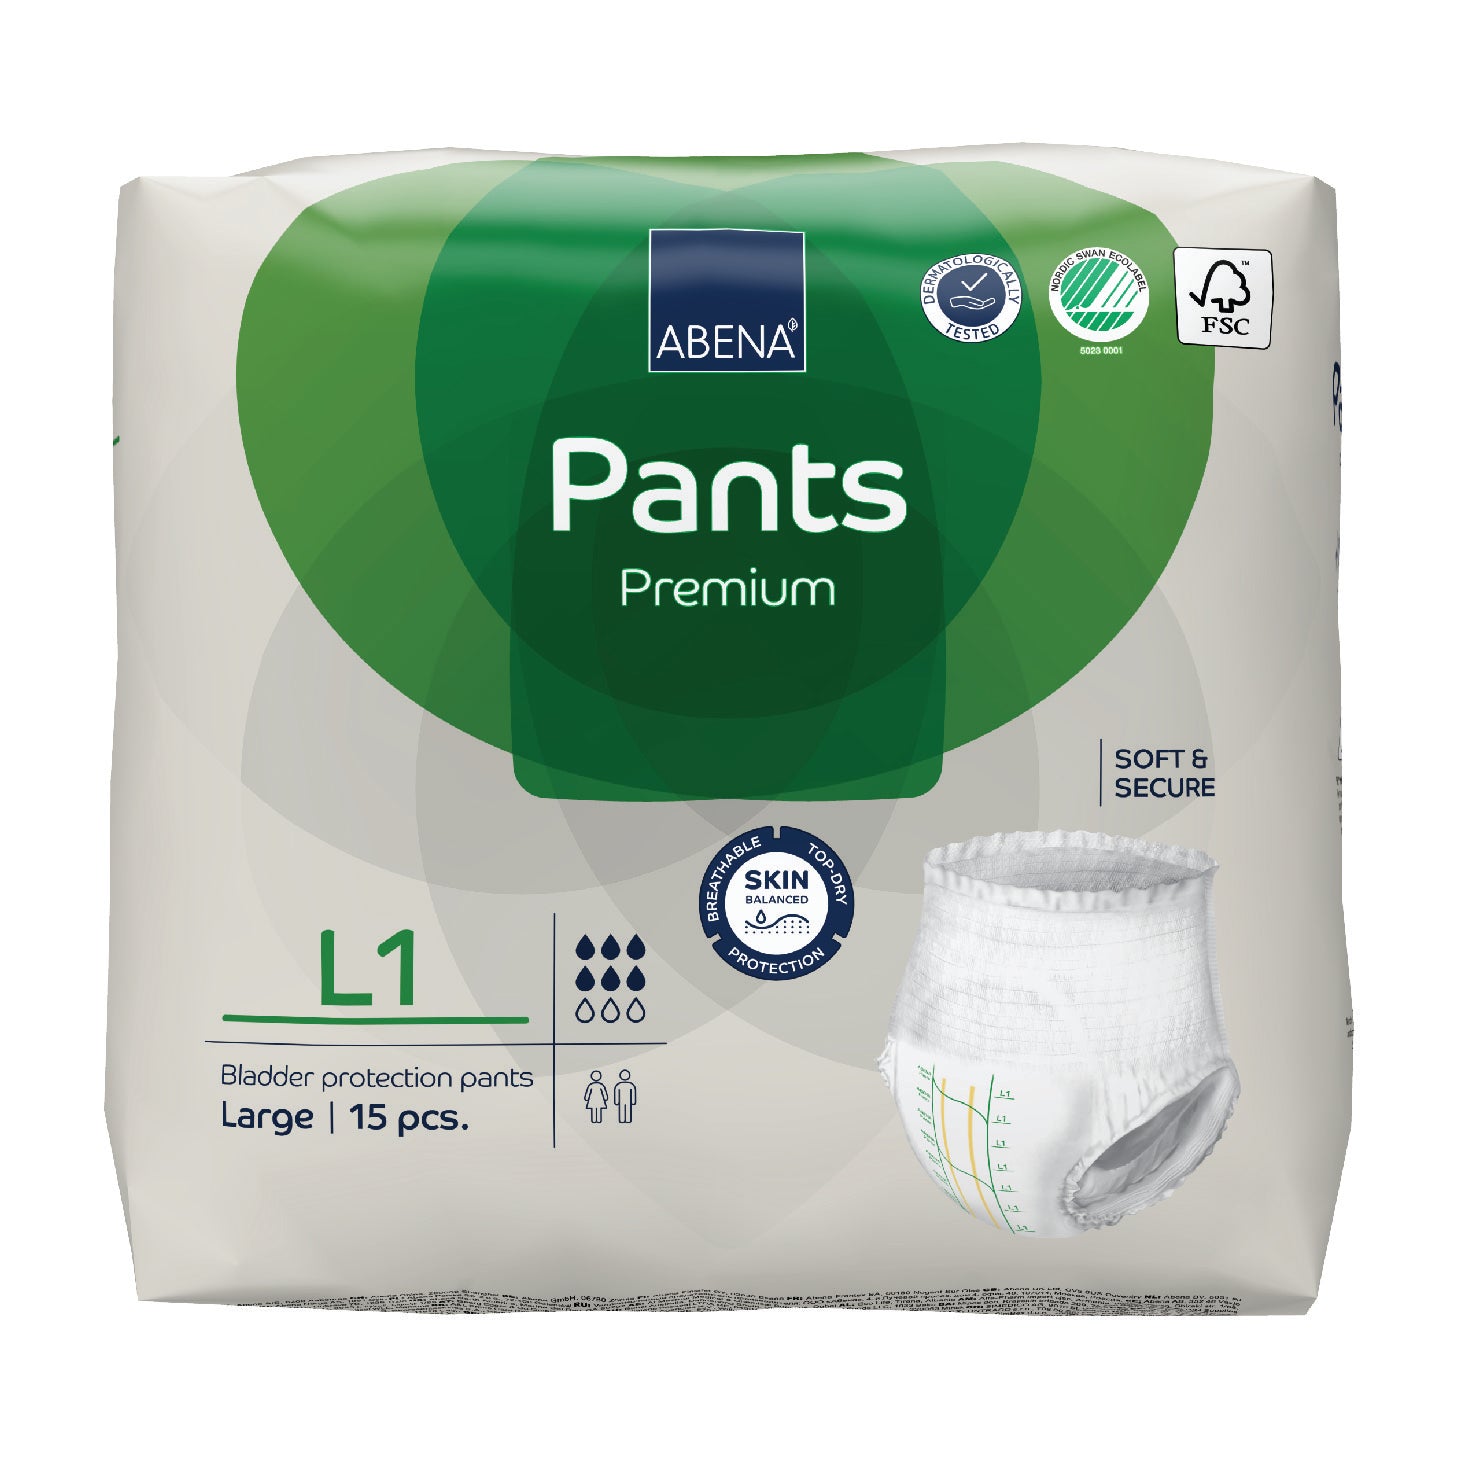 Abena Pants Protective Underwear - For Ultimate Performance